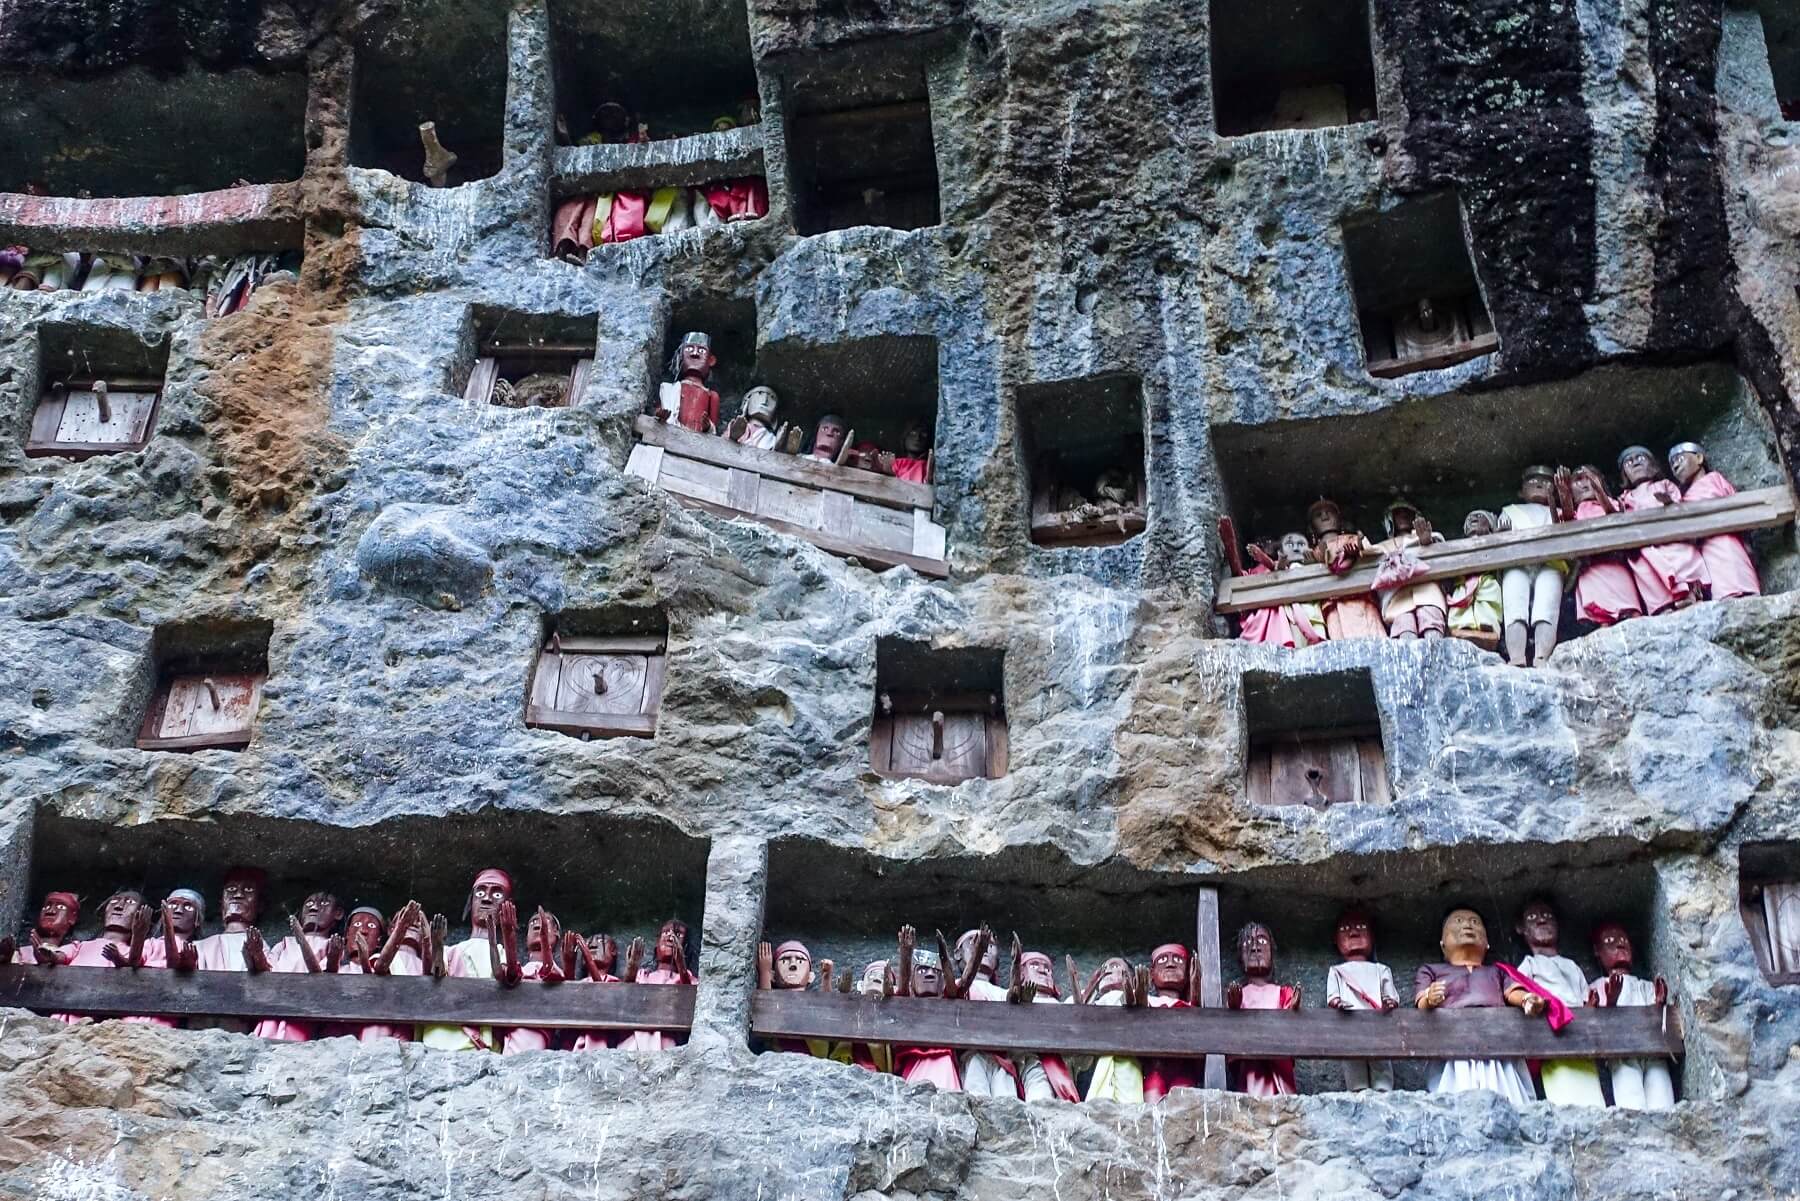 Toraja is one of the strange and unusual cemeteries of Asia